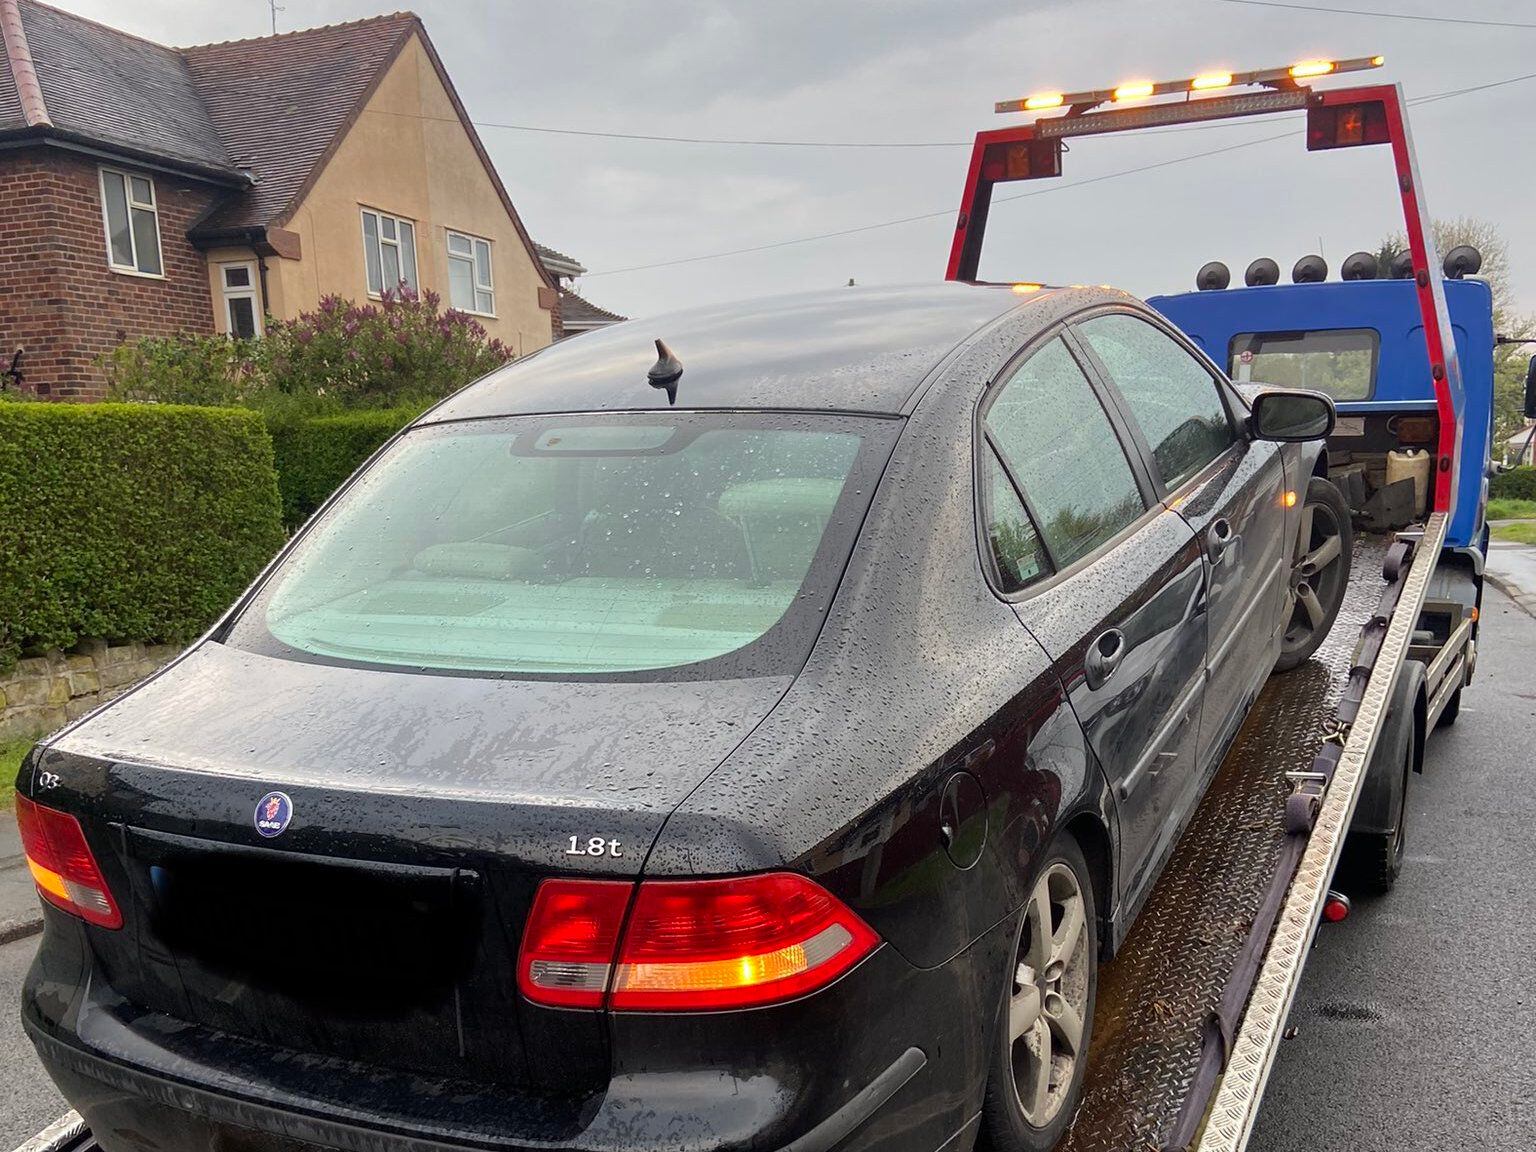 Stourbridge Police have successful Sunday removing stolen cars from borough's roads